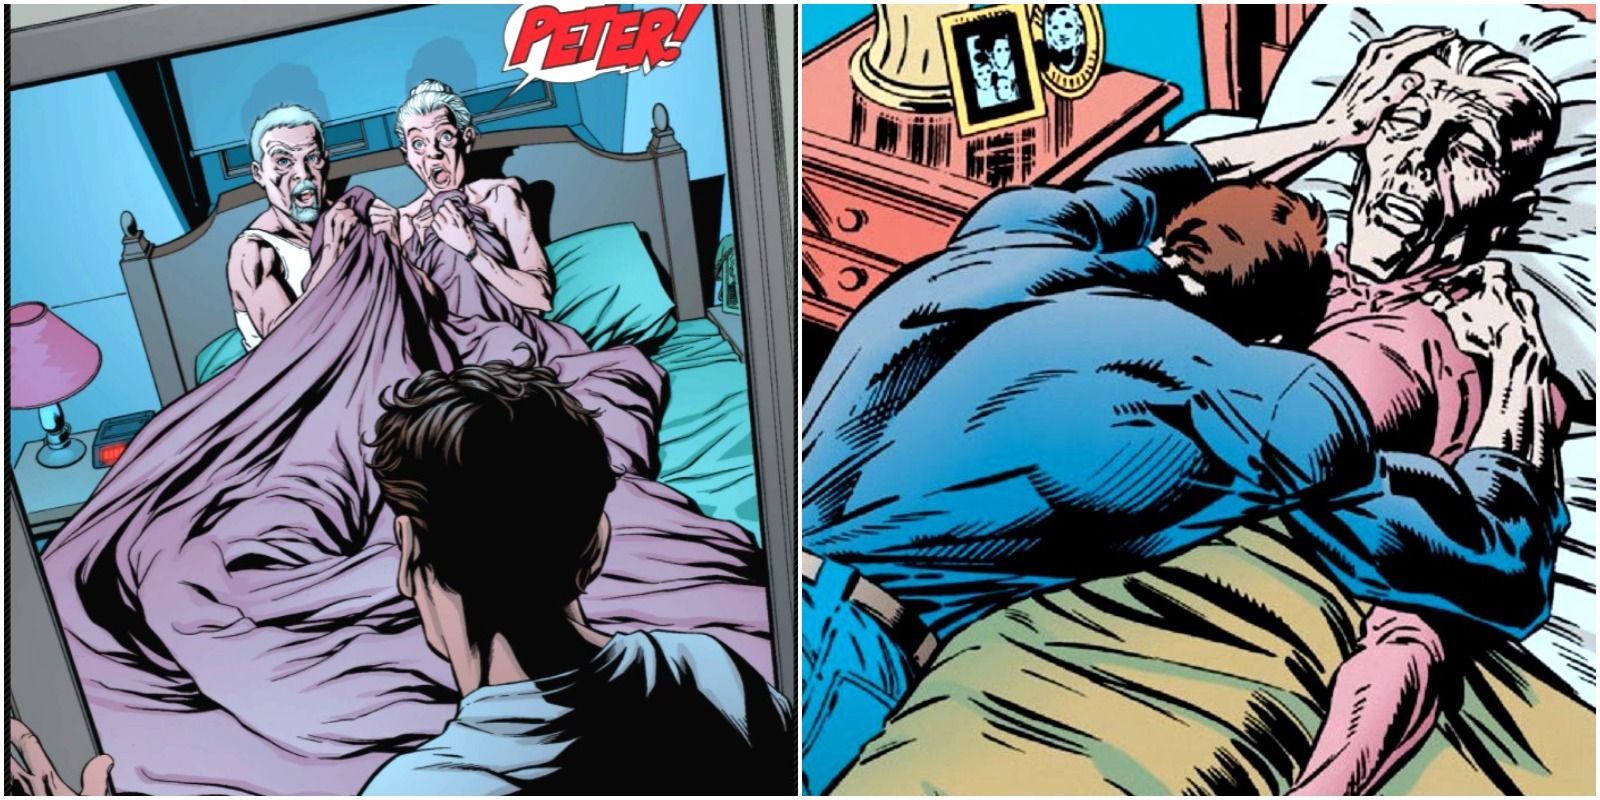 Peter catches Aunt May in Bed with John Jonah Jameson and Peter heartbroken over Aunt May's Death